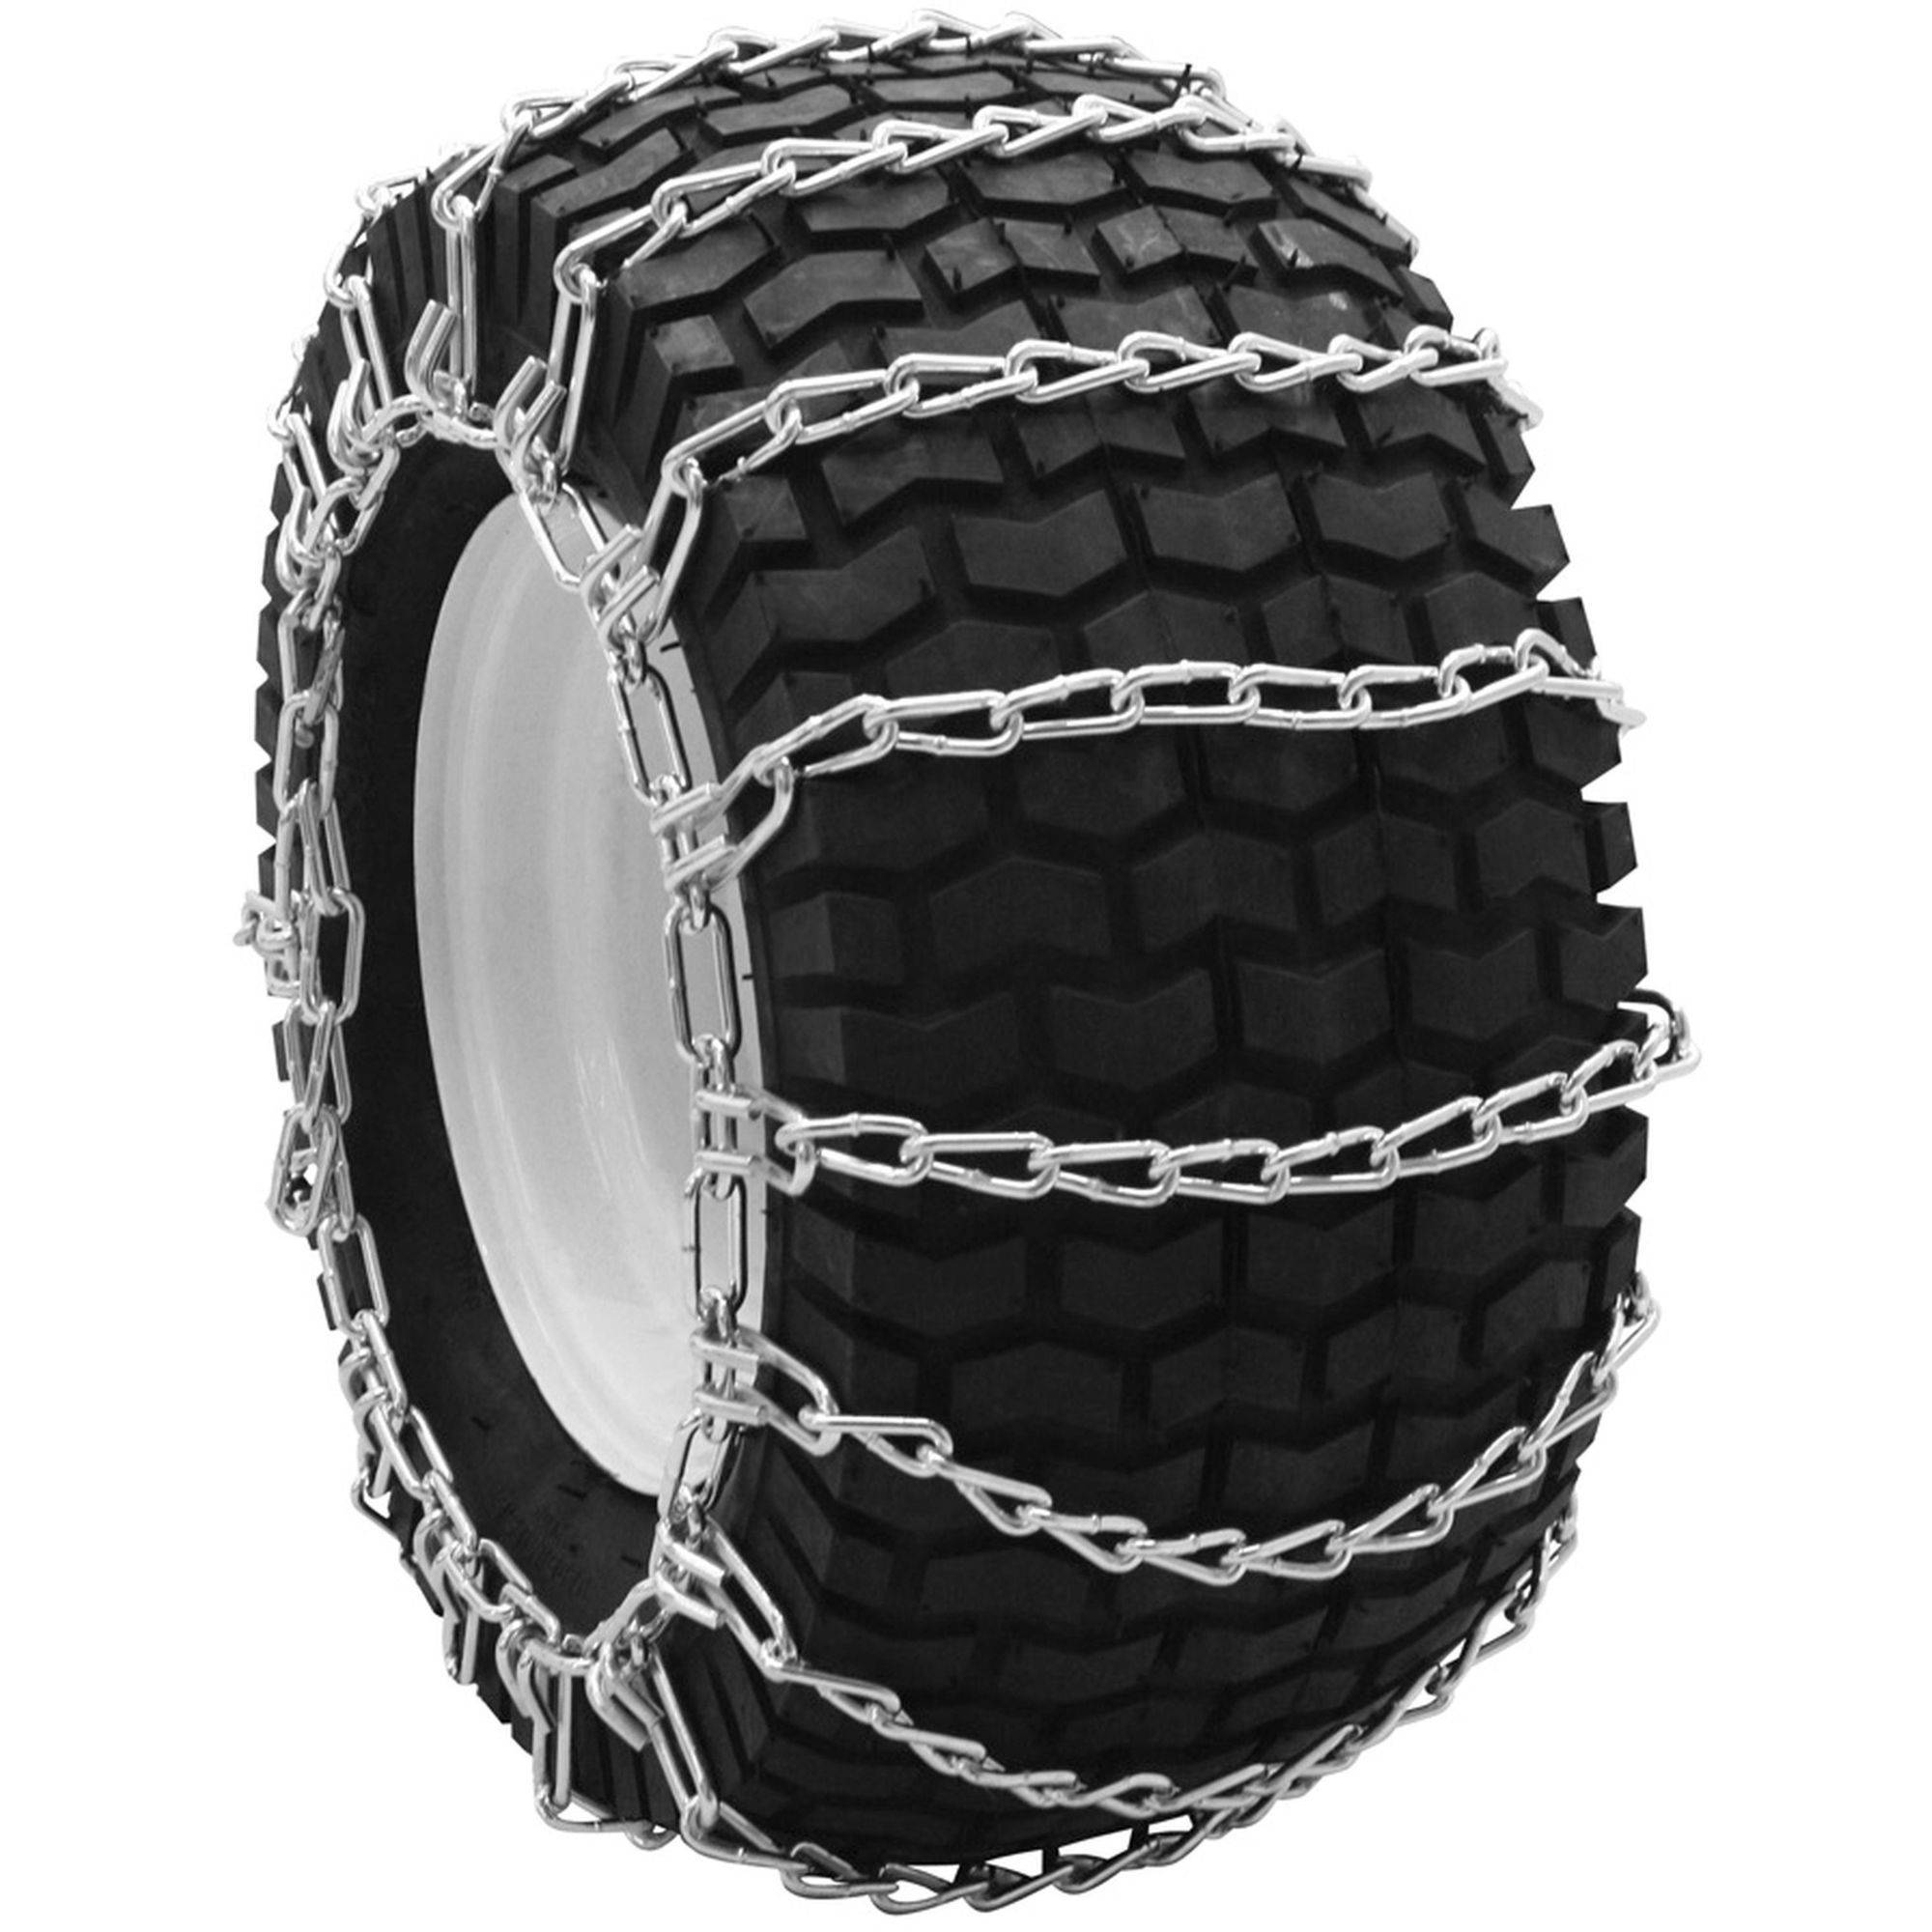 12.4 28 Duo Grip Tractor Tire Chains w/Spring Tensioners TireChain.com 12.4-28 